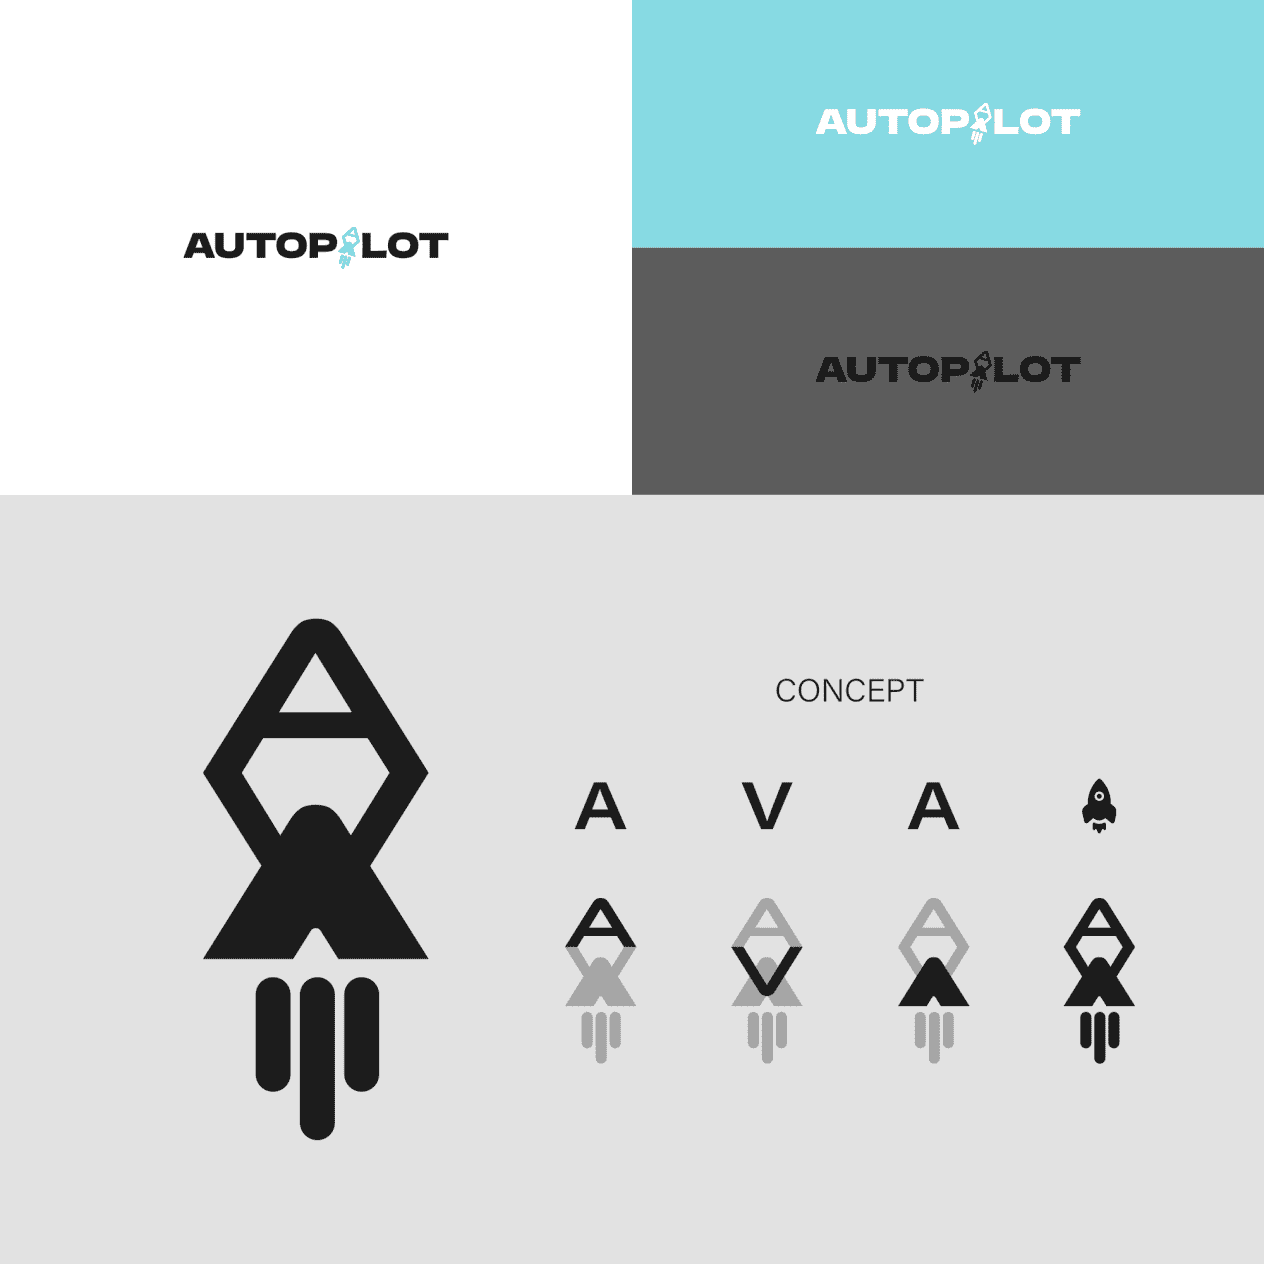 I will design awesome logos